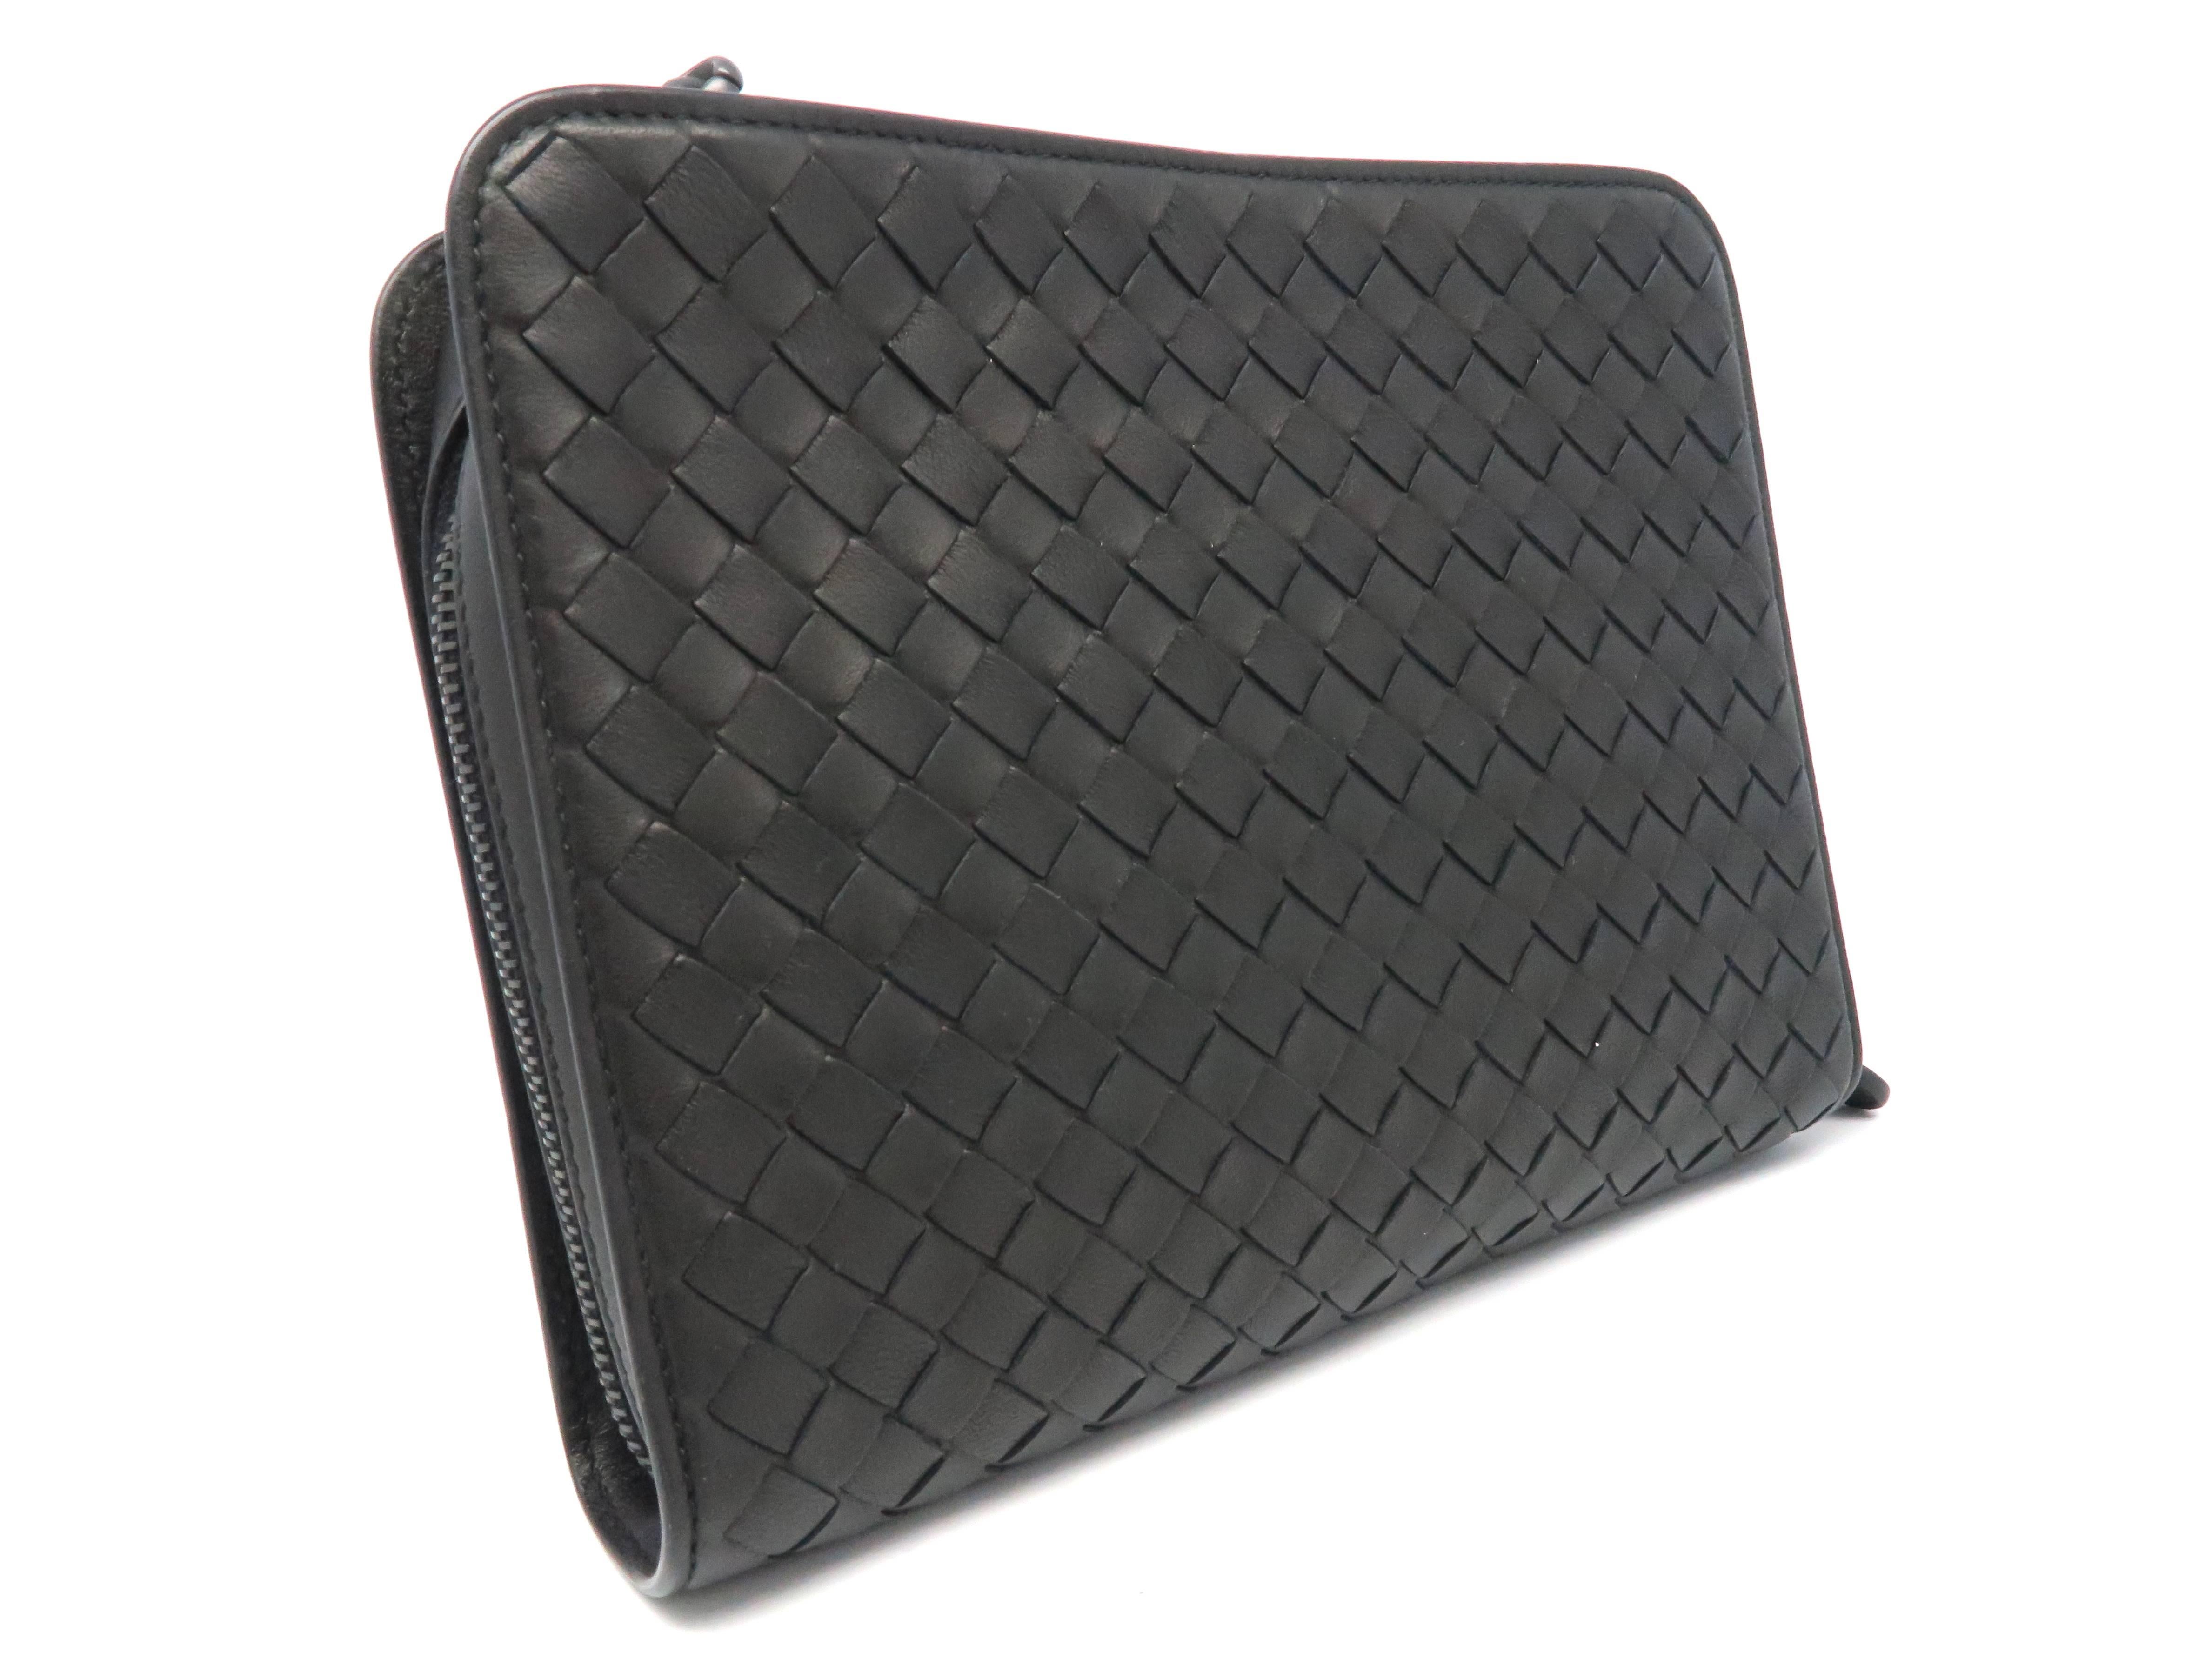 Color: Black

Material: Intrecciato Leather

Condition: Rank S
Overall: Almost New
Surface:Minor Scratches 
Corners:Good
Edges:Minor Scratches 
Handles/Straps:Minor Scratches 
Hardware:Good

Dimensions: W22 × H18 × D5cm（W8.6" × H7.0" ×